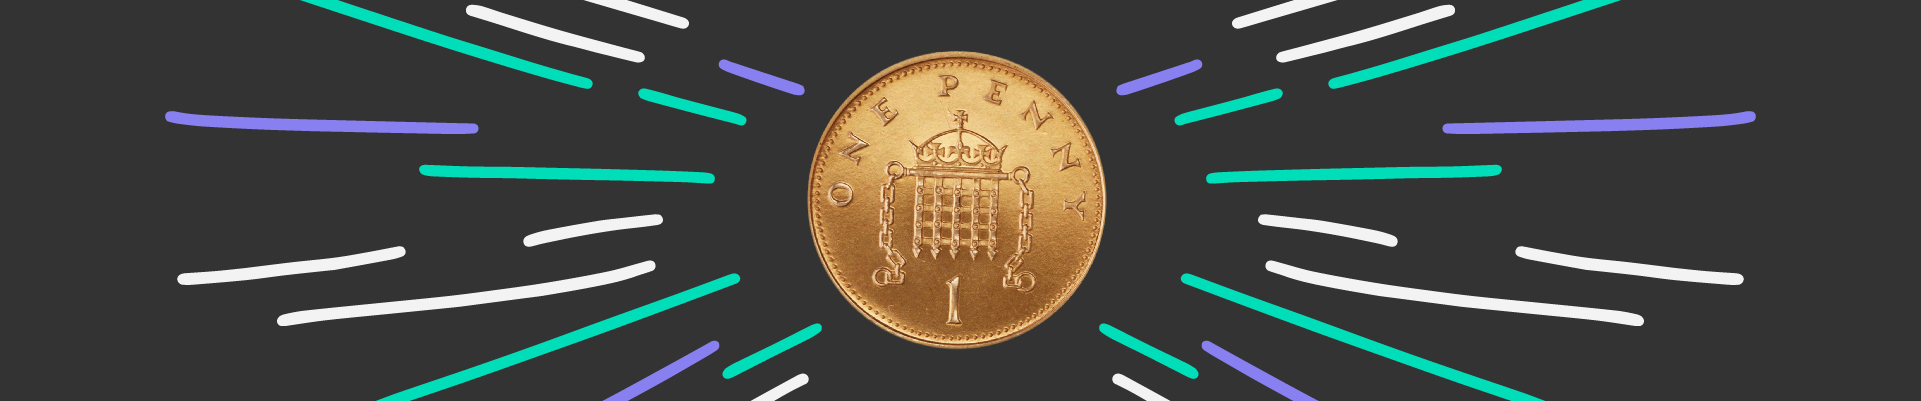 1 pence coin